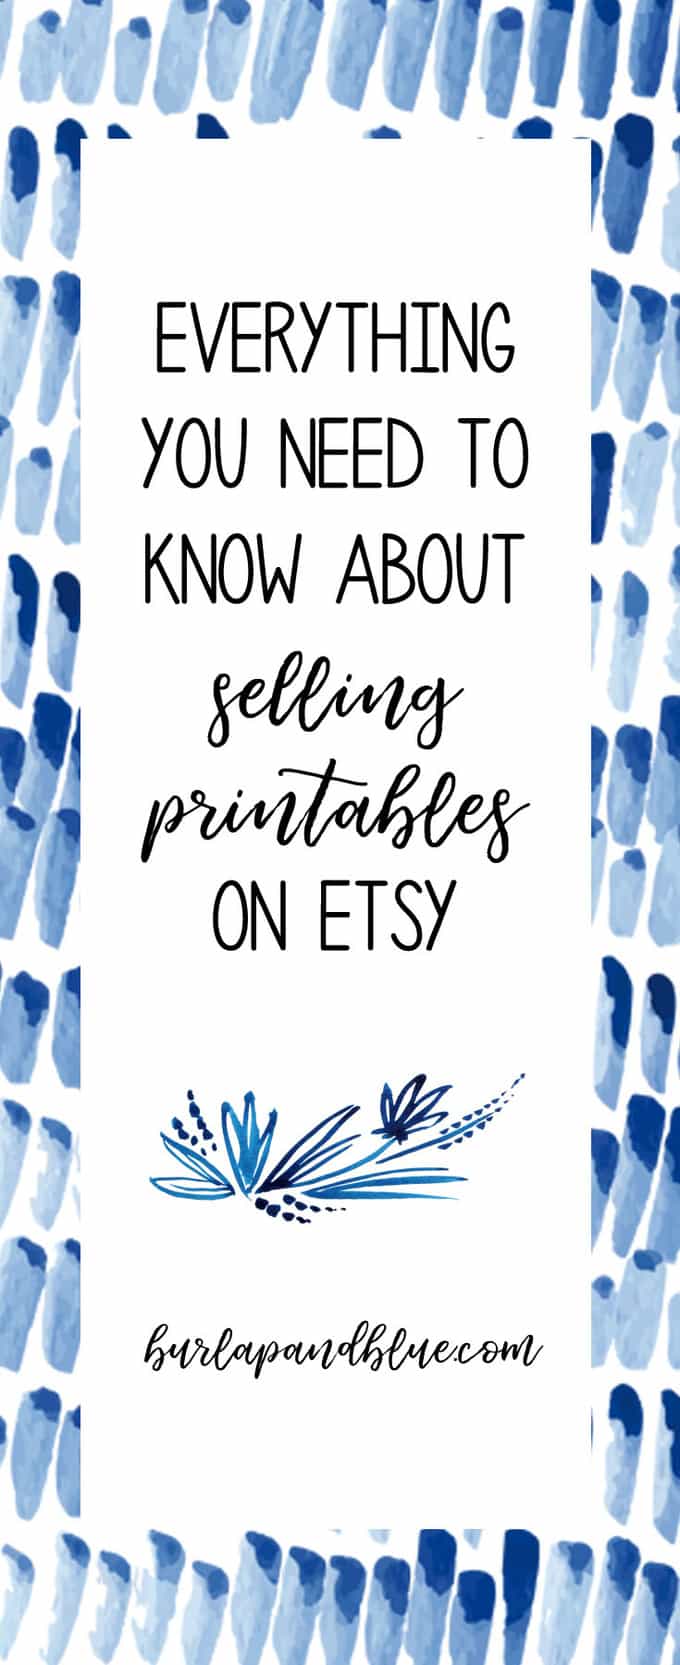 How To Start Selling Printables On Etsy